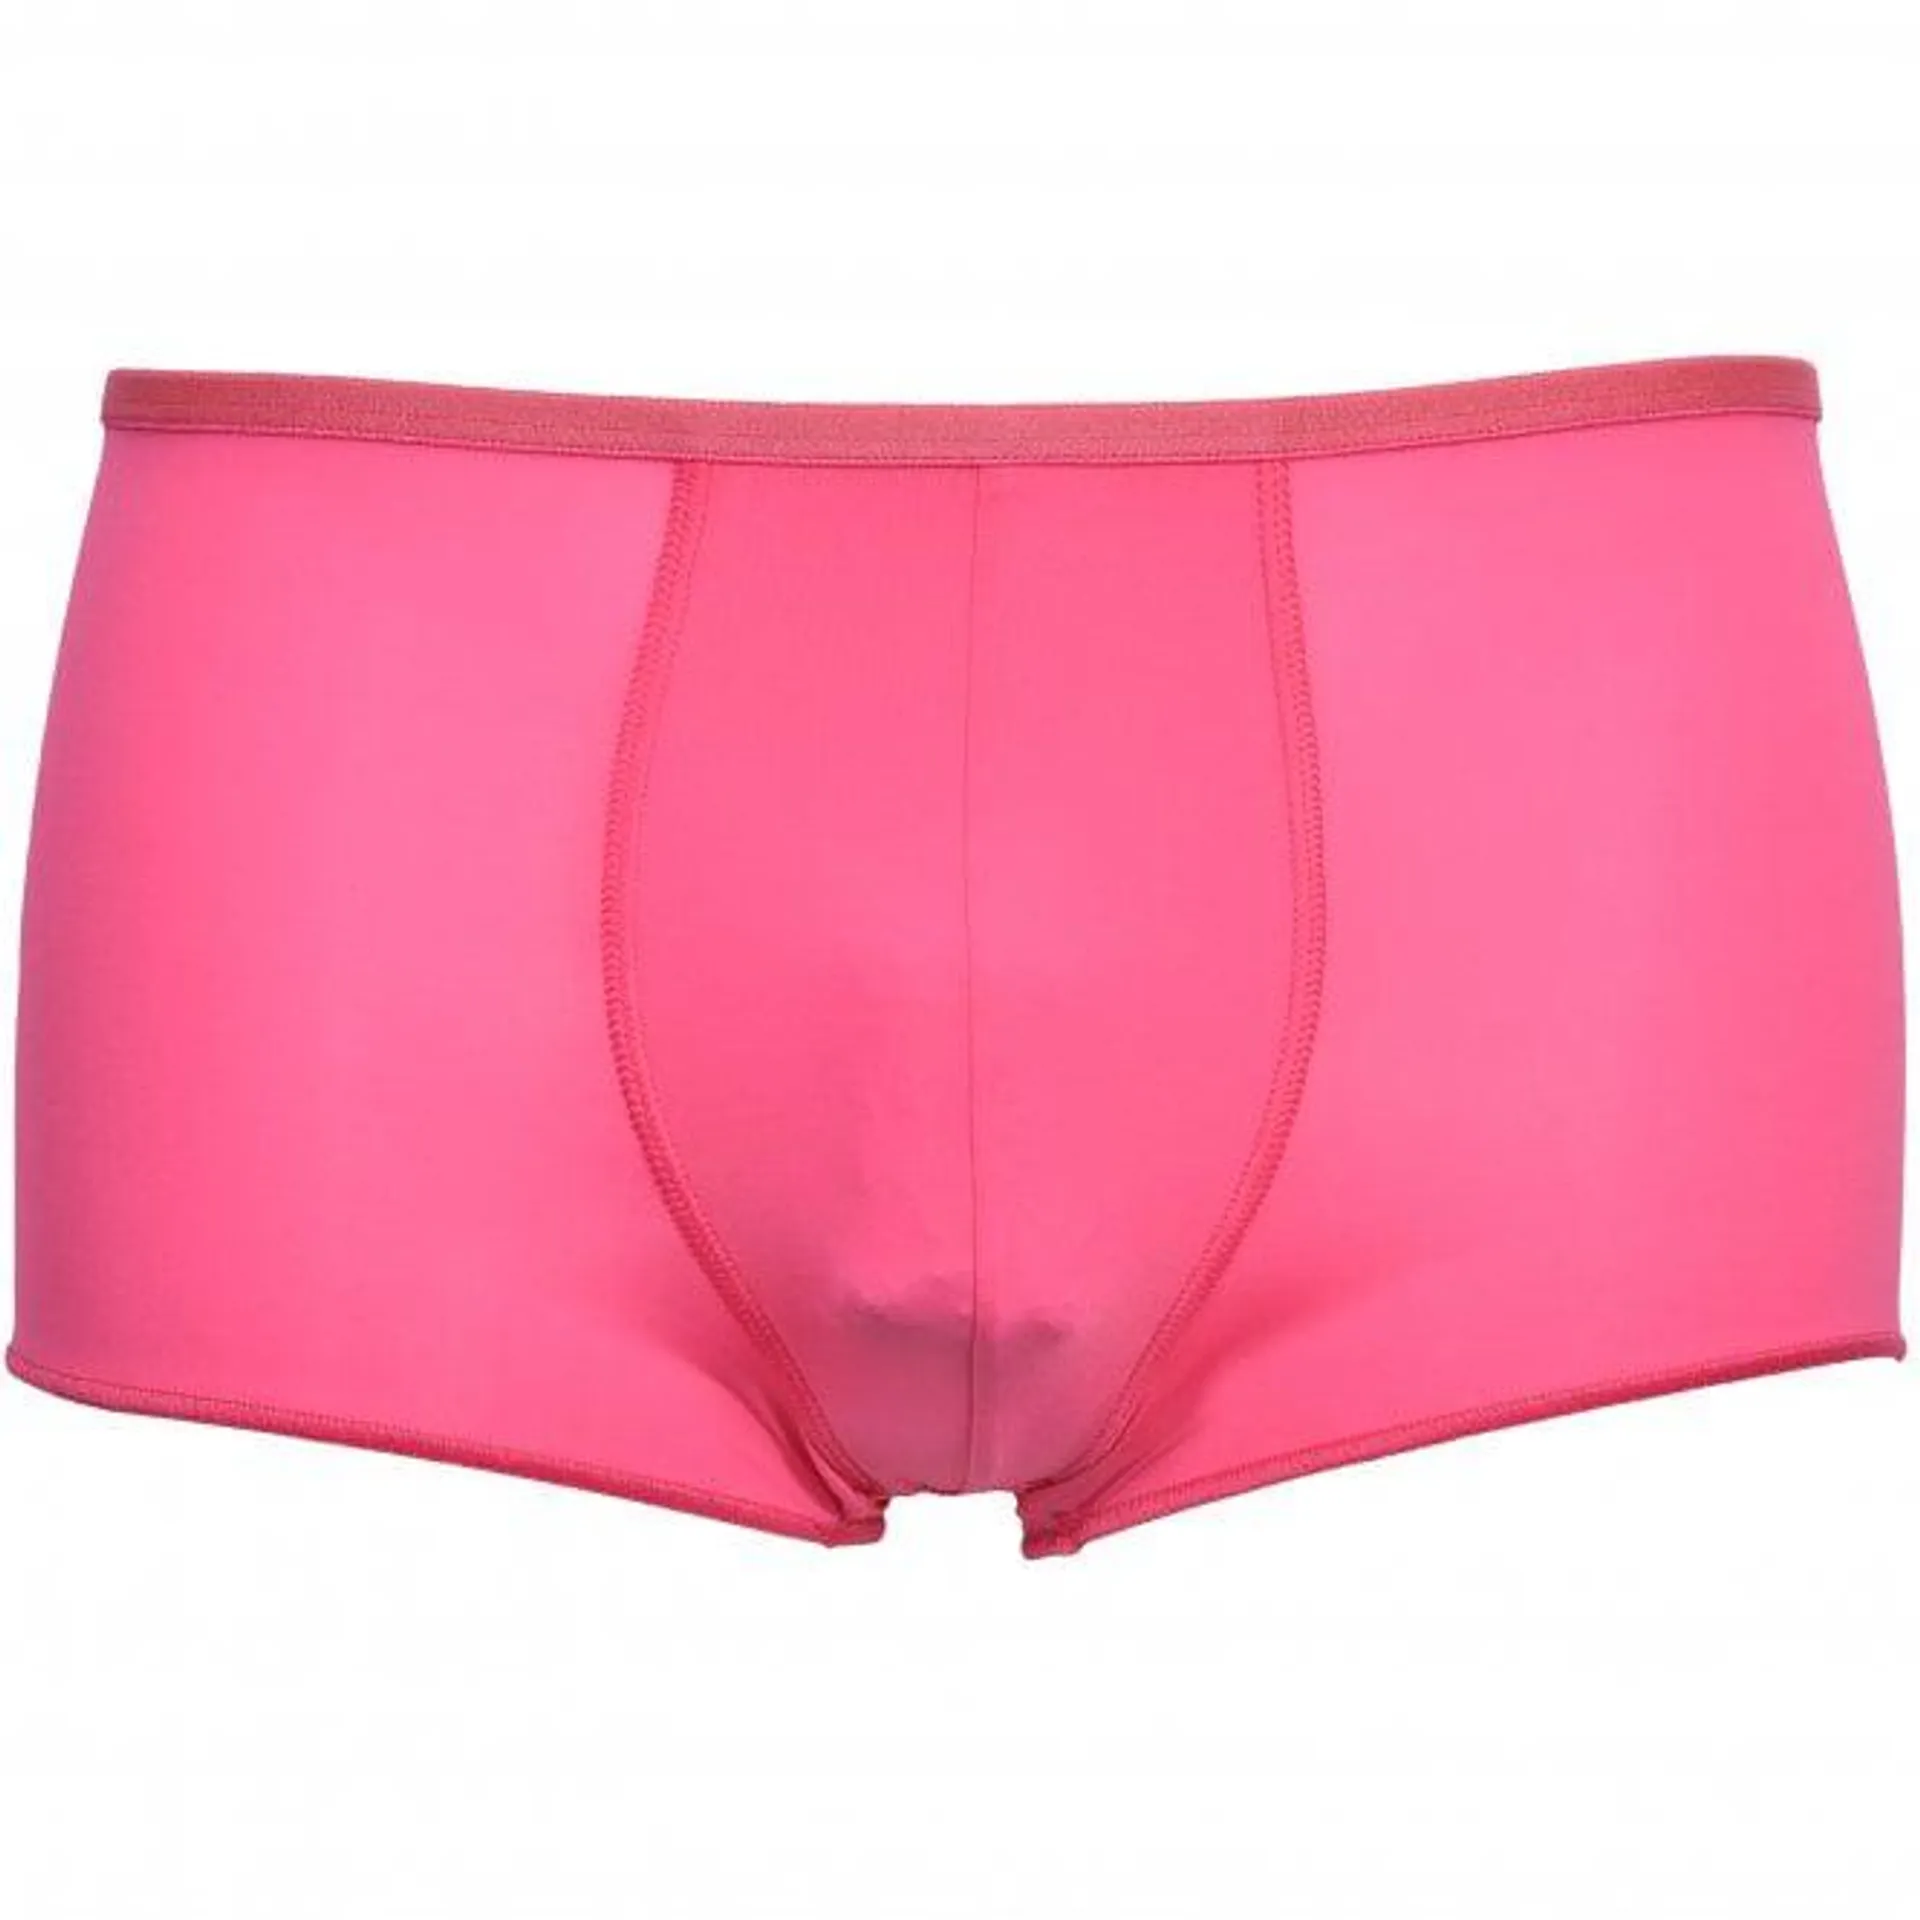 Plume Boxer Trunk, Pink